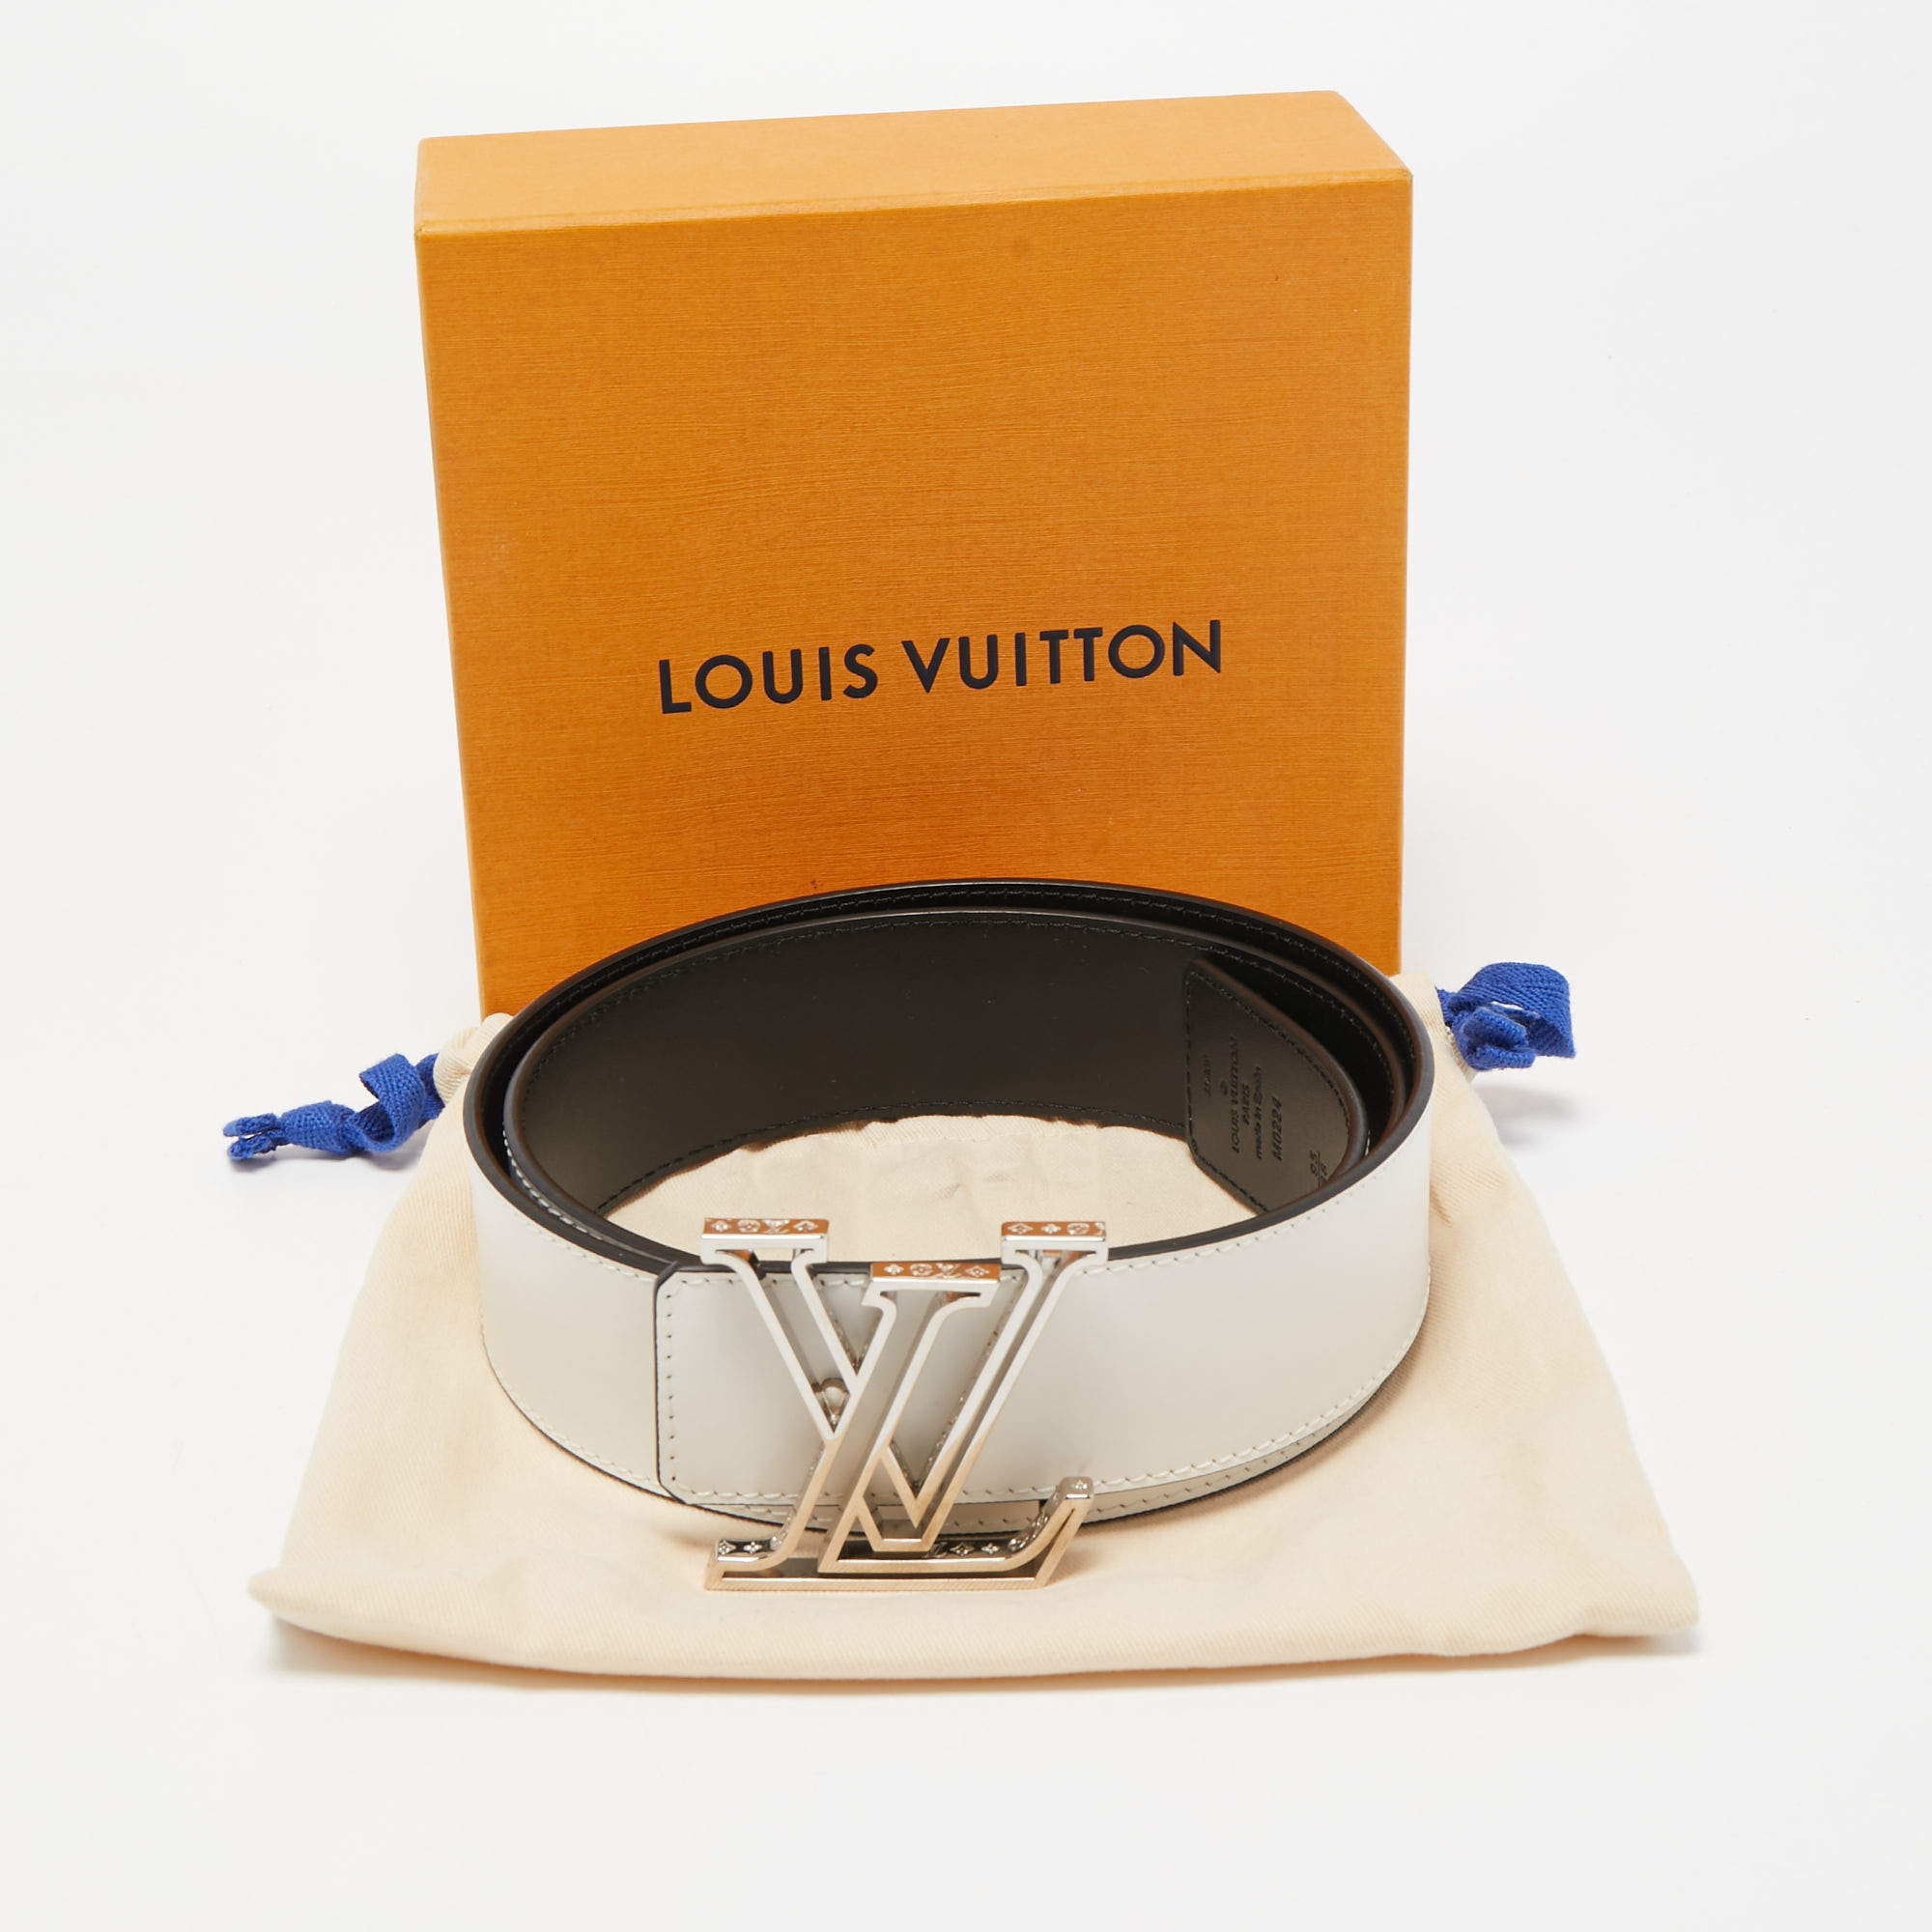 Initiales leather belt Louis Vuitton White size L International in Leather  - 32145084